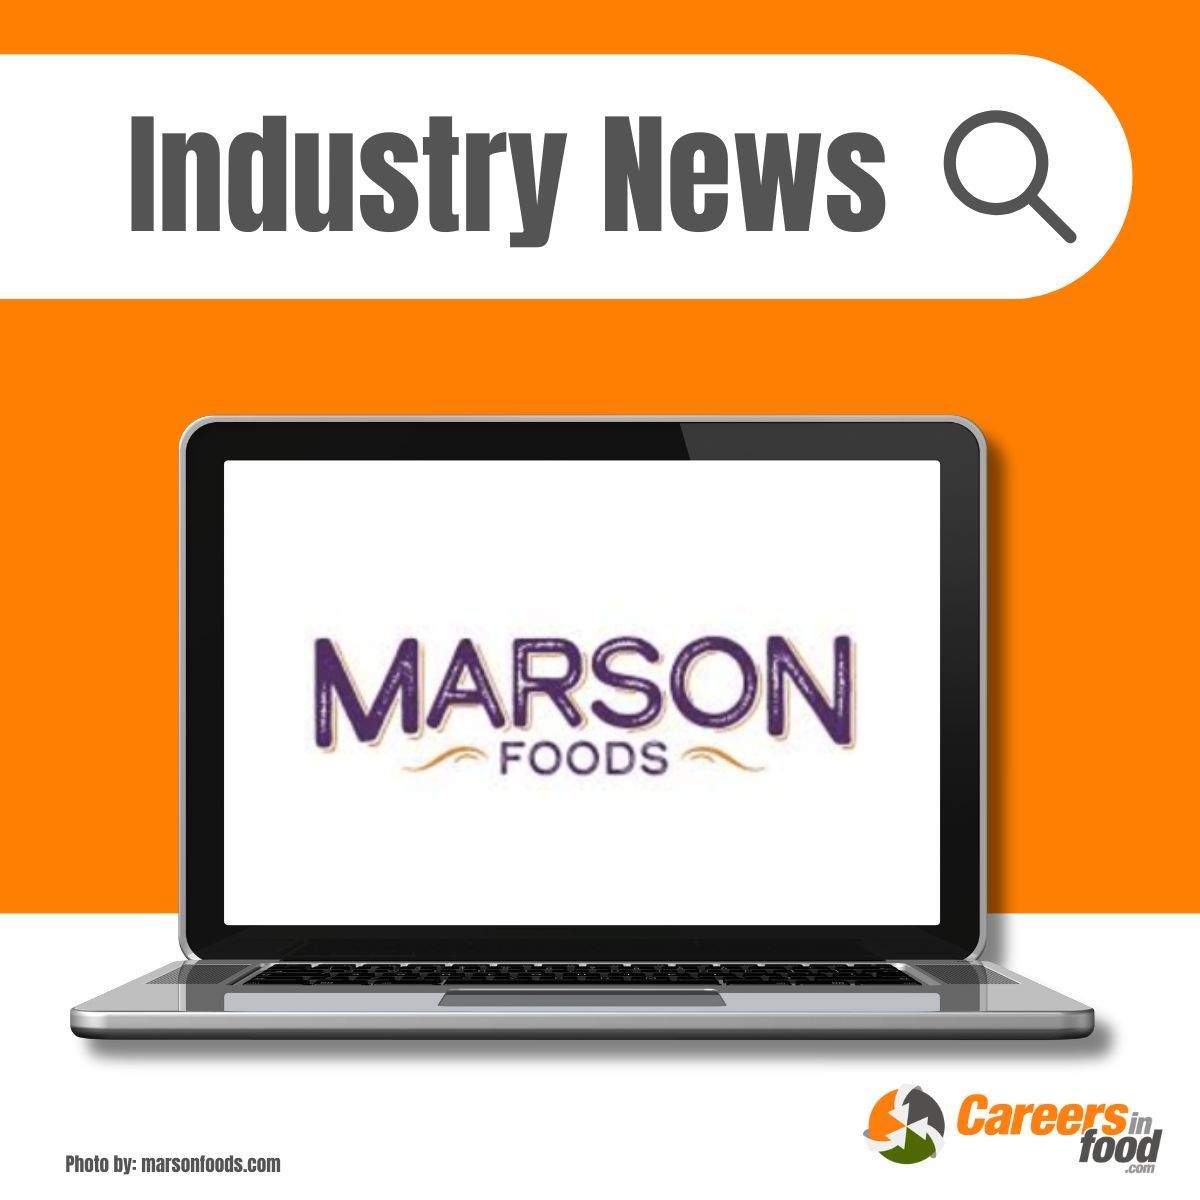 Marson Foods Launches Major New #Baking Facility!

The facility has already started making a positive impact on the local economy, hiring 16 employees at competitive salaries.

Explore this new facility: careersinfood.com/career-plannin… 

#FoodNews #FoodProduction #BusinessGrowth